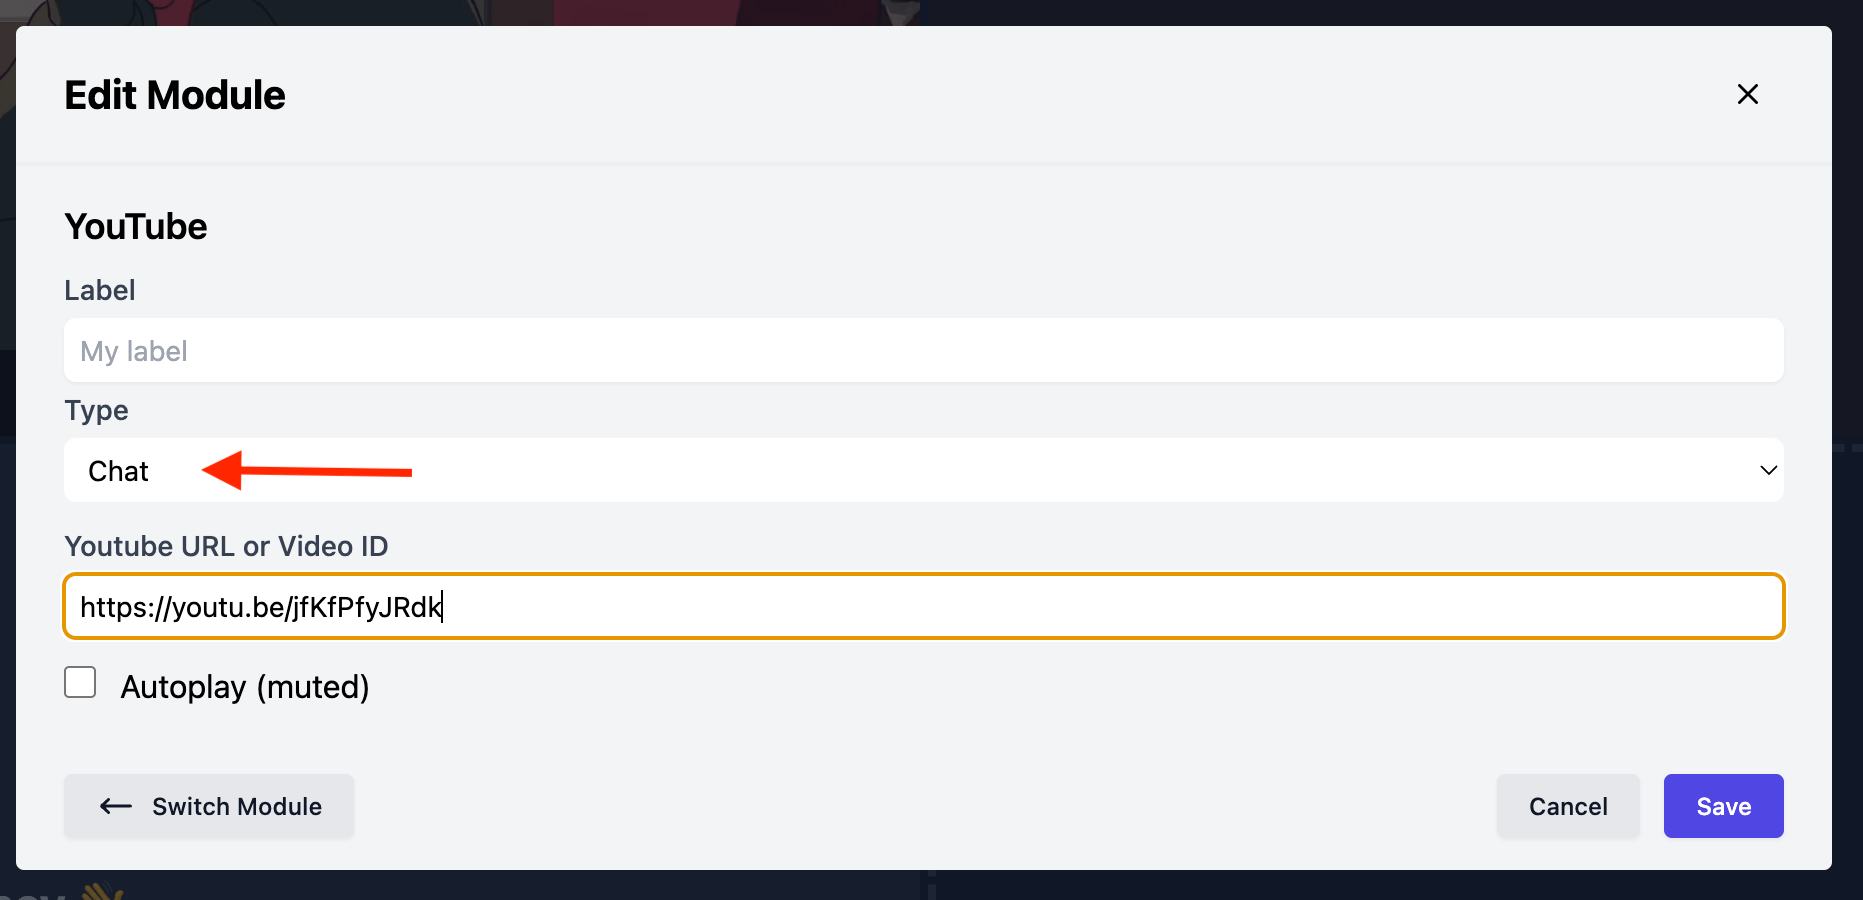 Selecting the Chat type